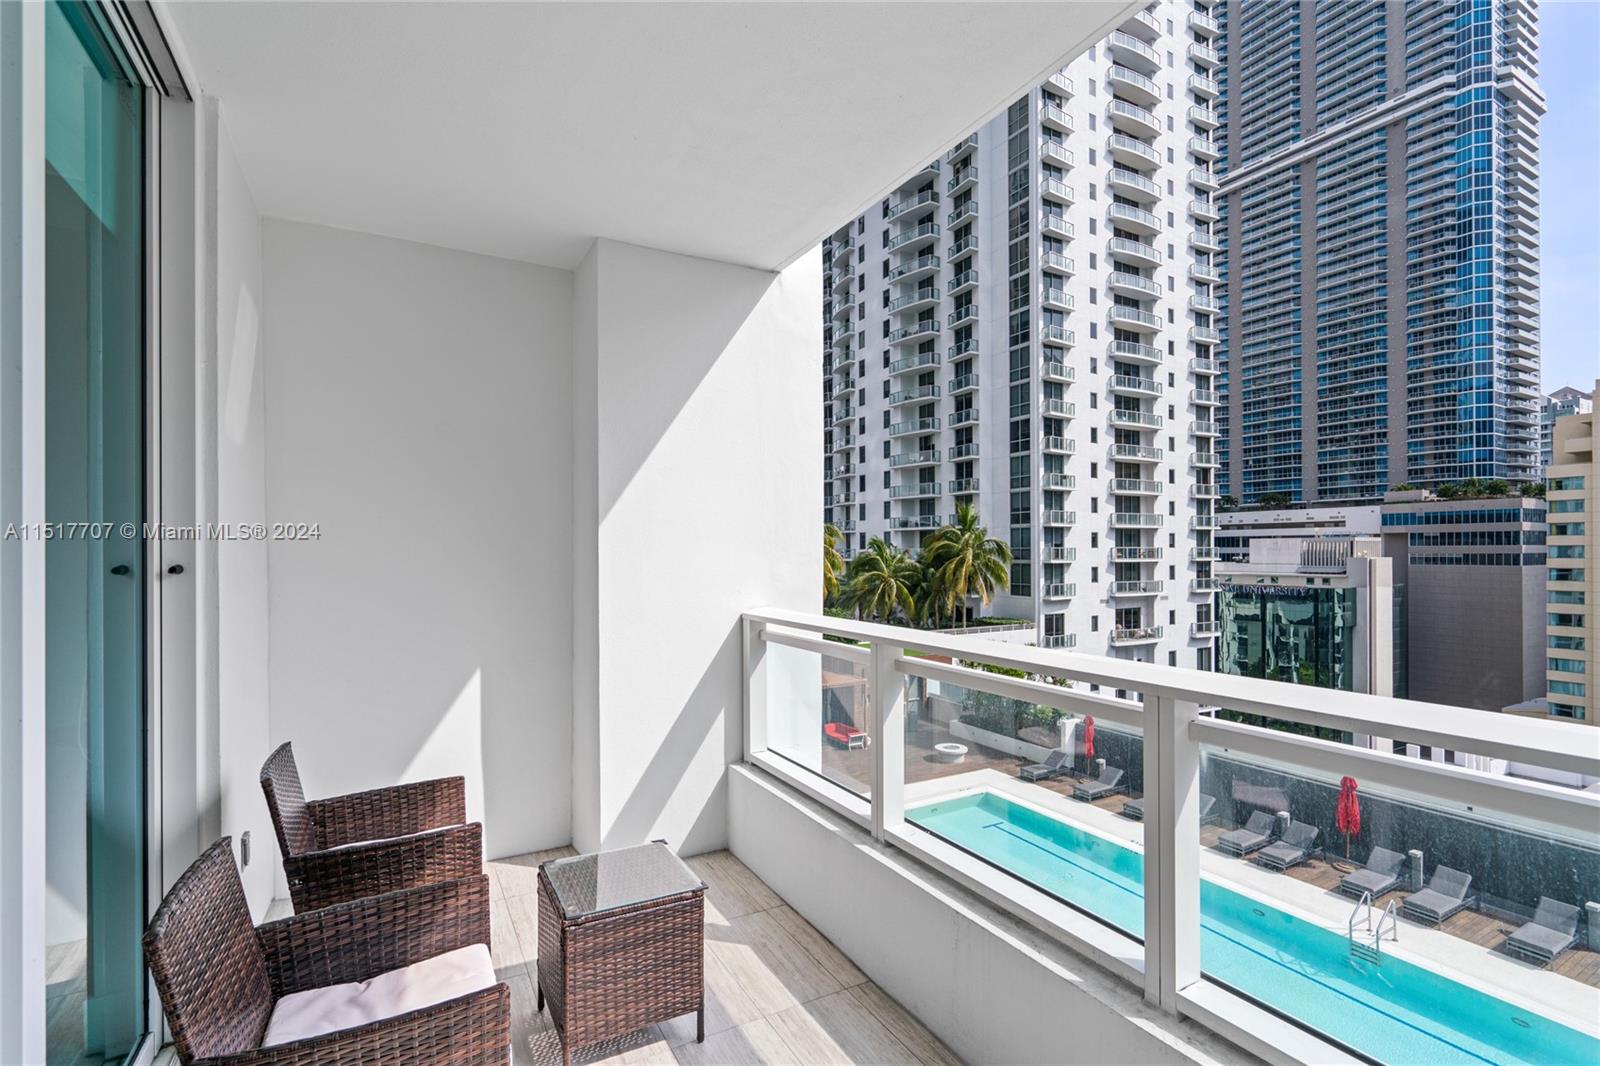 1080  Brickell Ave #1502 For Sale A11517707, FL